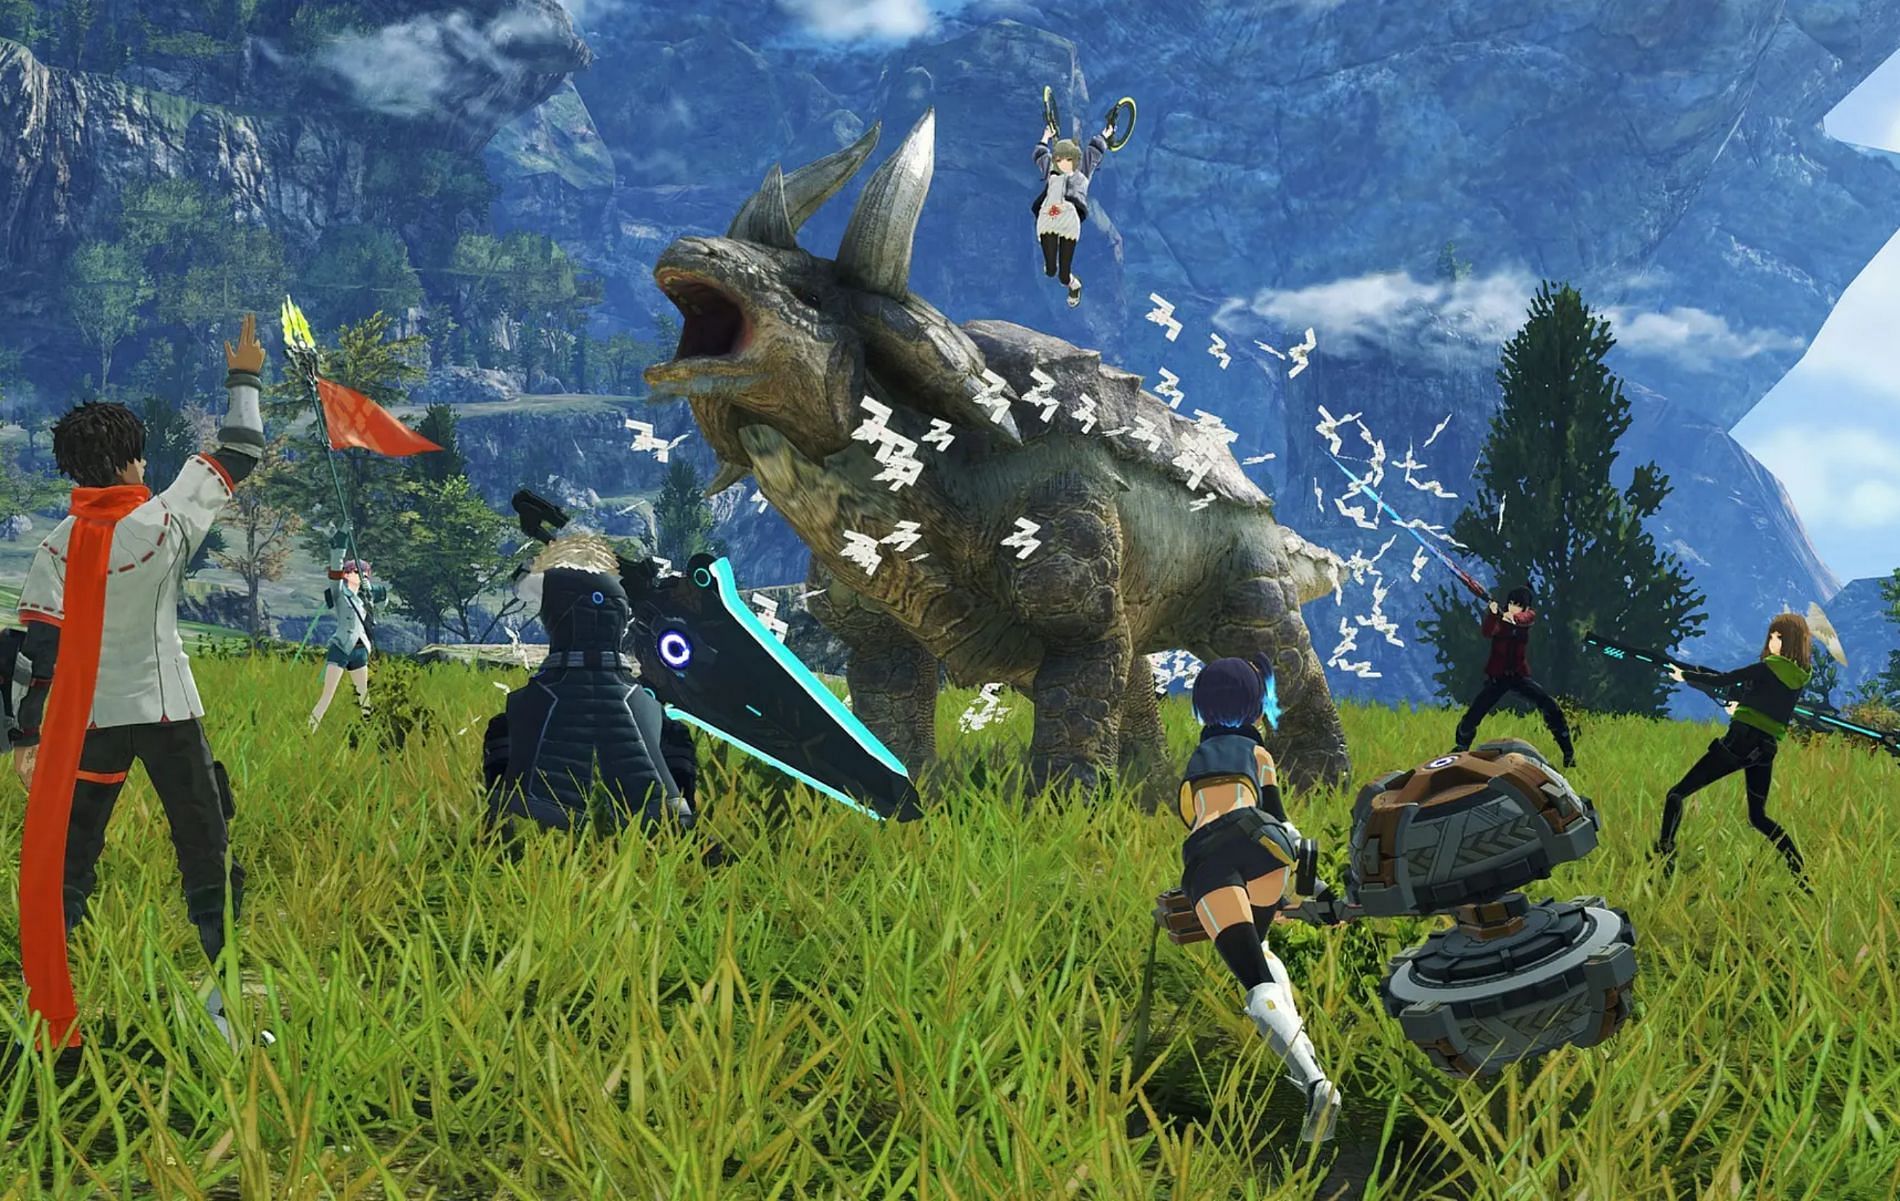 Xenoblade Chronicles 3 Expansion Pass All DLC waves, roadmap, and